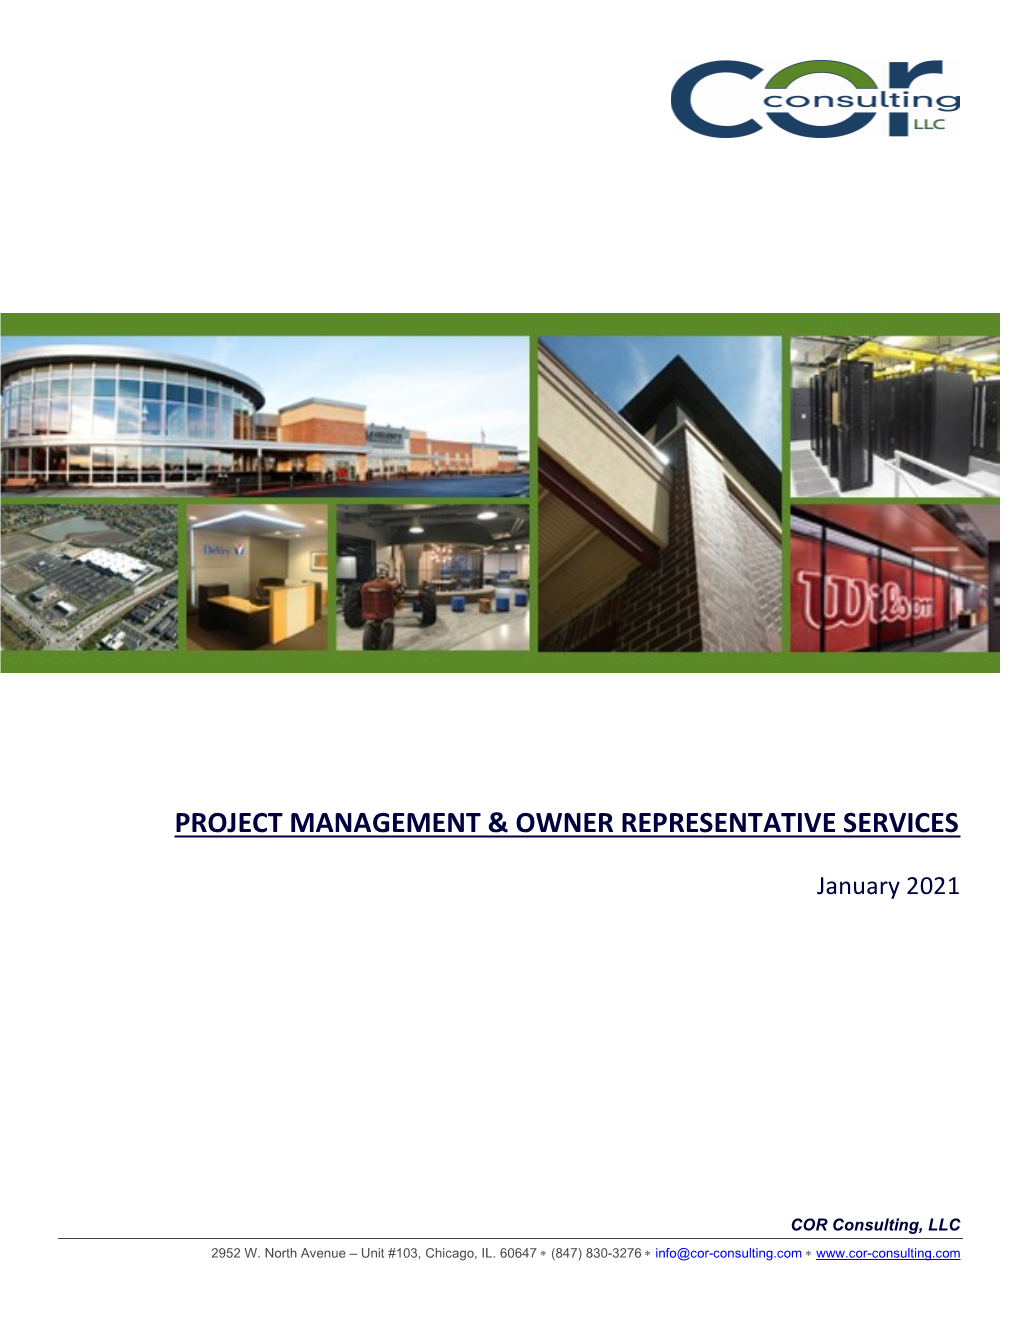 Project Management & Owner Representative Services